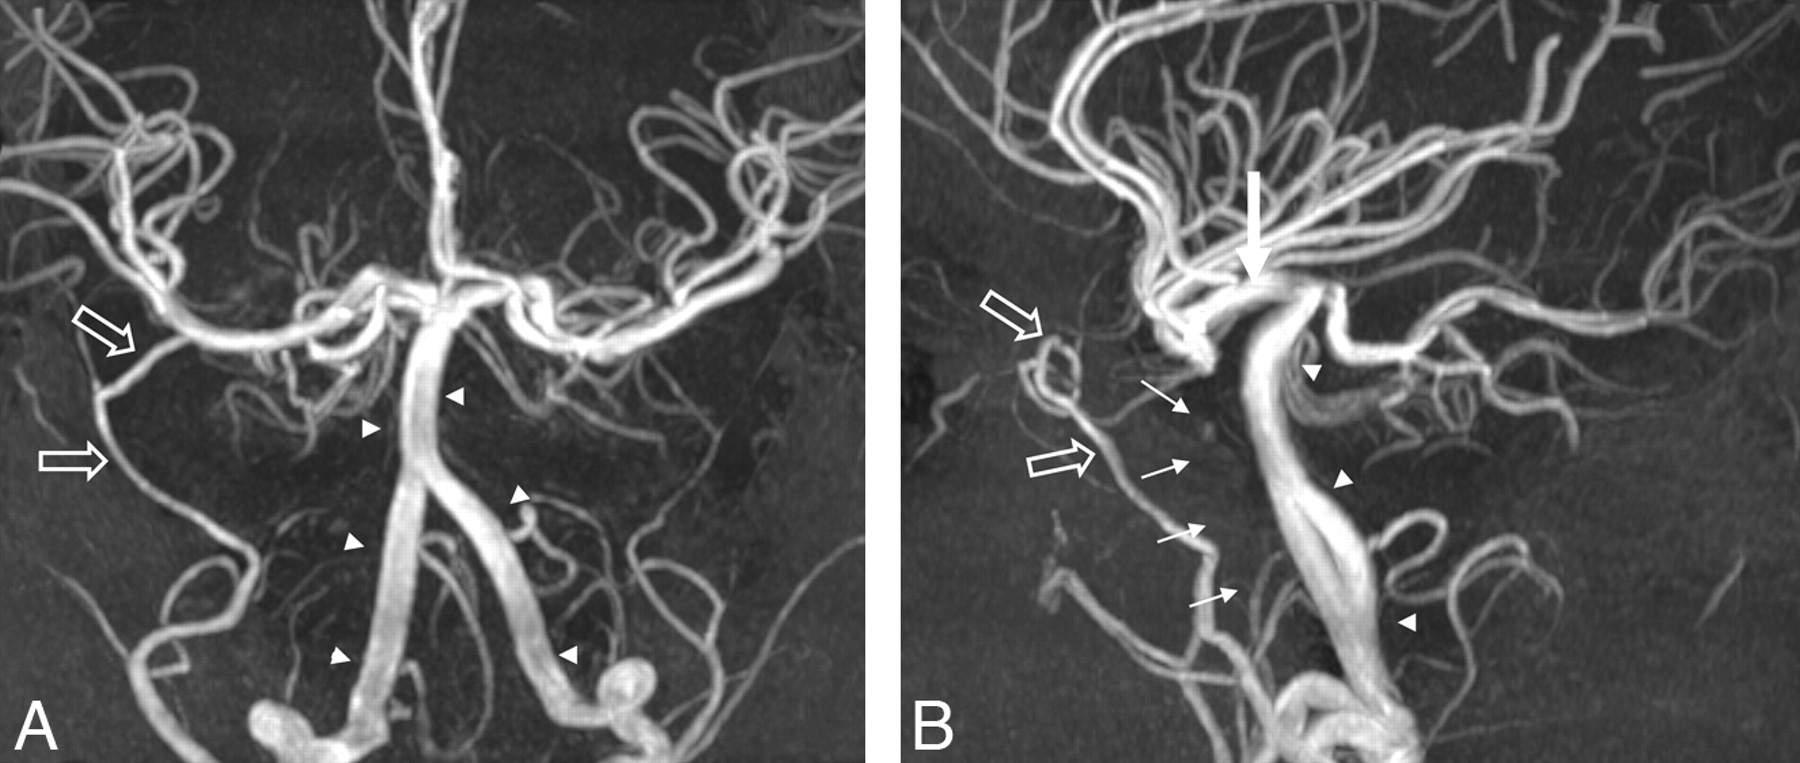 Bilateral Complete Labyrinthine Aplasia with Bilateral Internal Carotid